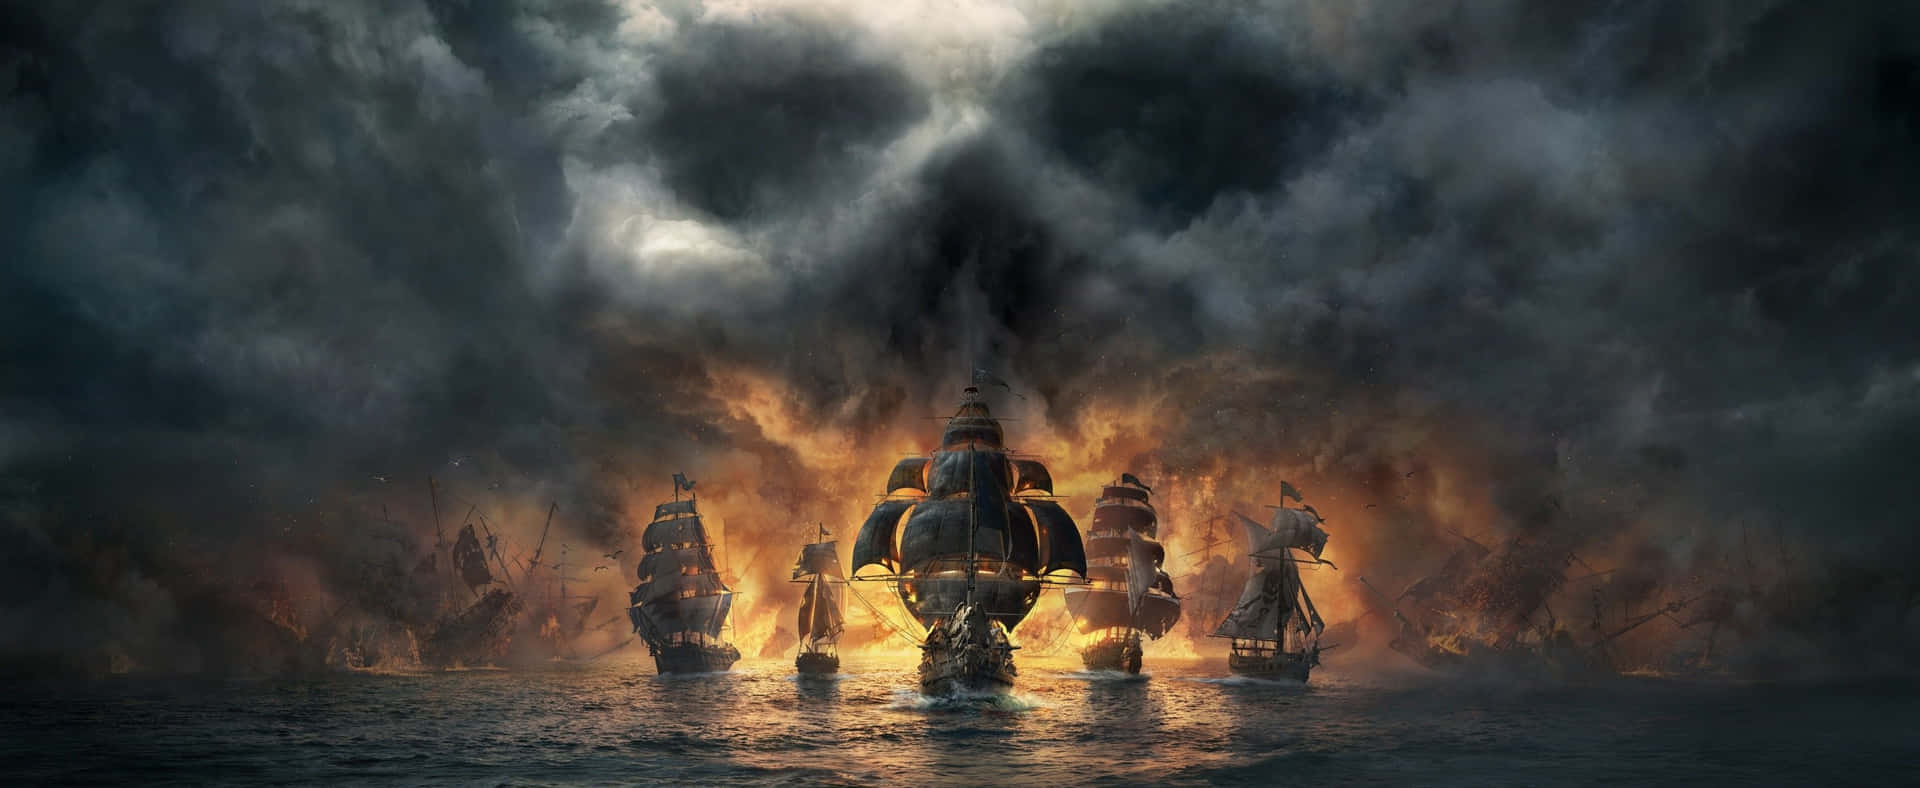 Bold and thrilling adventures with "Skull and Bones" in ultimate 3440x1440 resolution Wallpaper